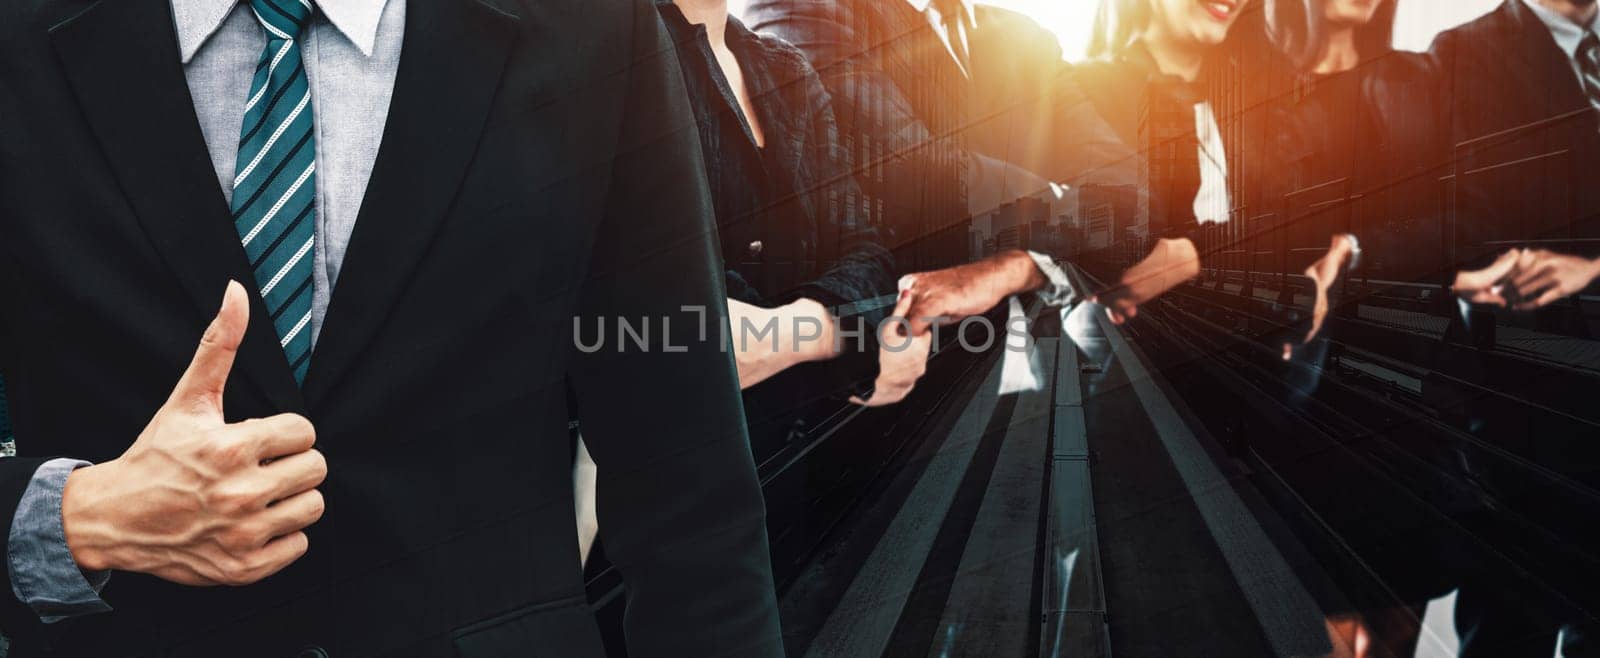 Double Exposure Image of Business Team uds by biancoblue